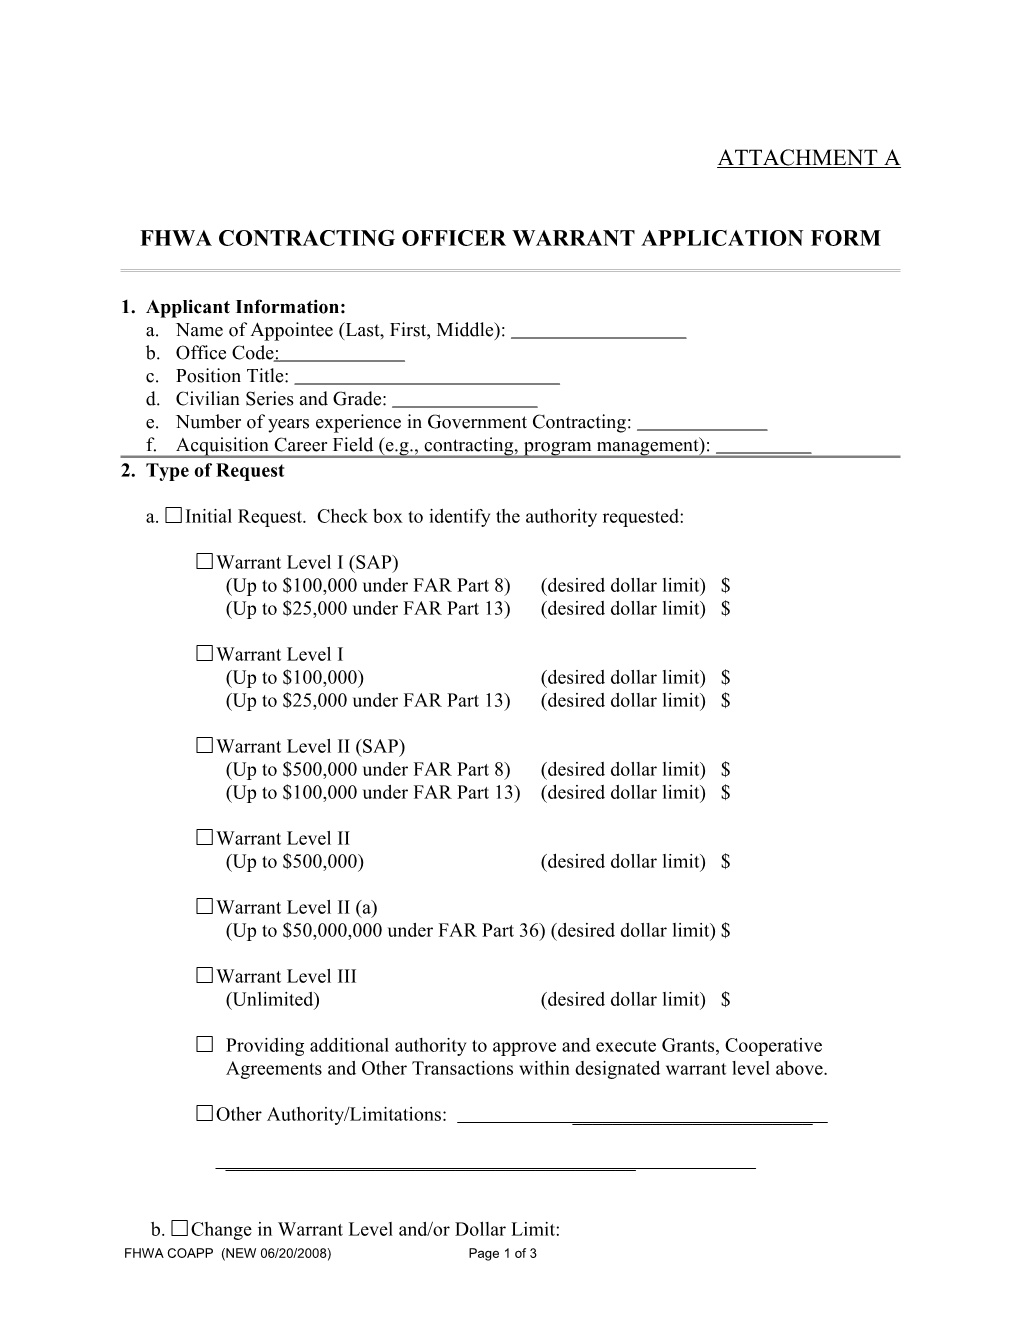 Fhwa Contracting Officer Warrant Application Form